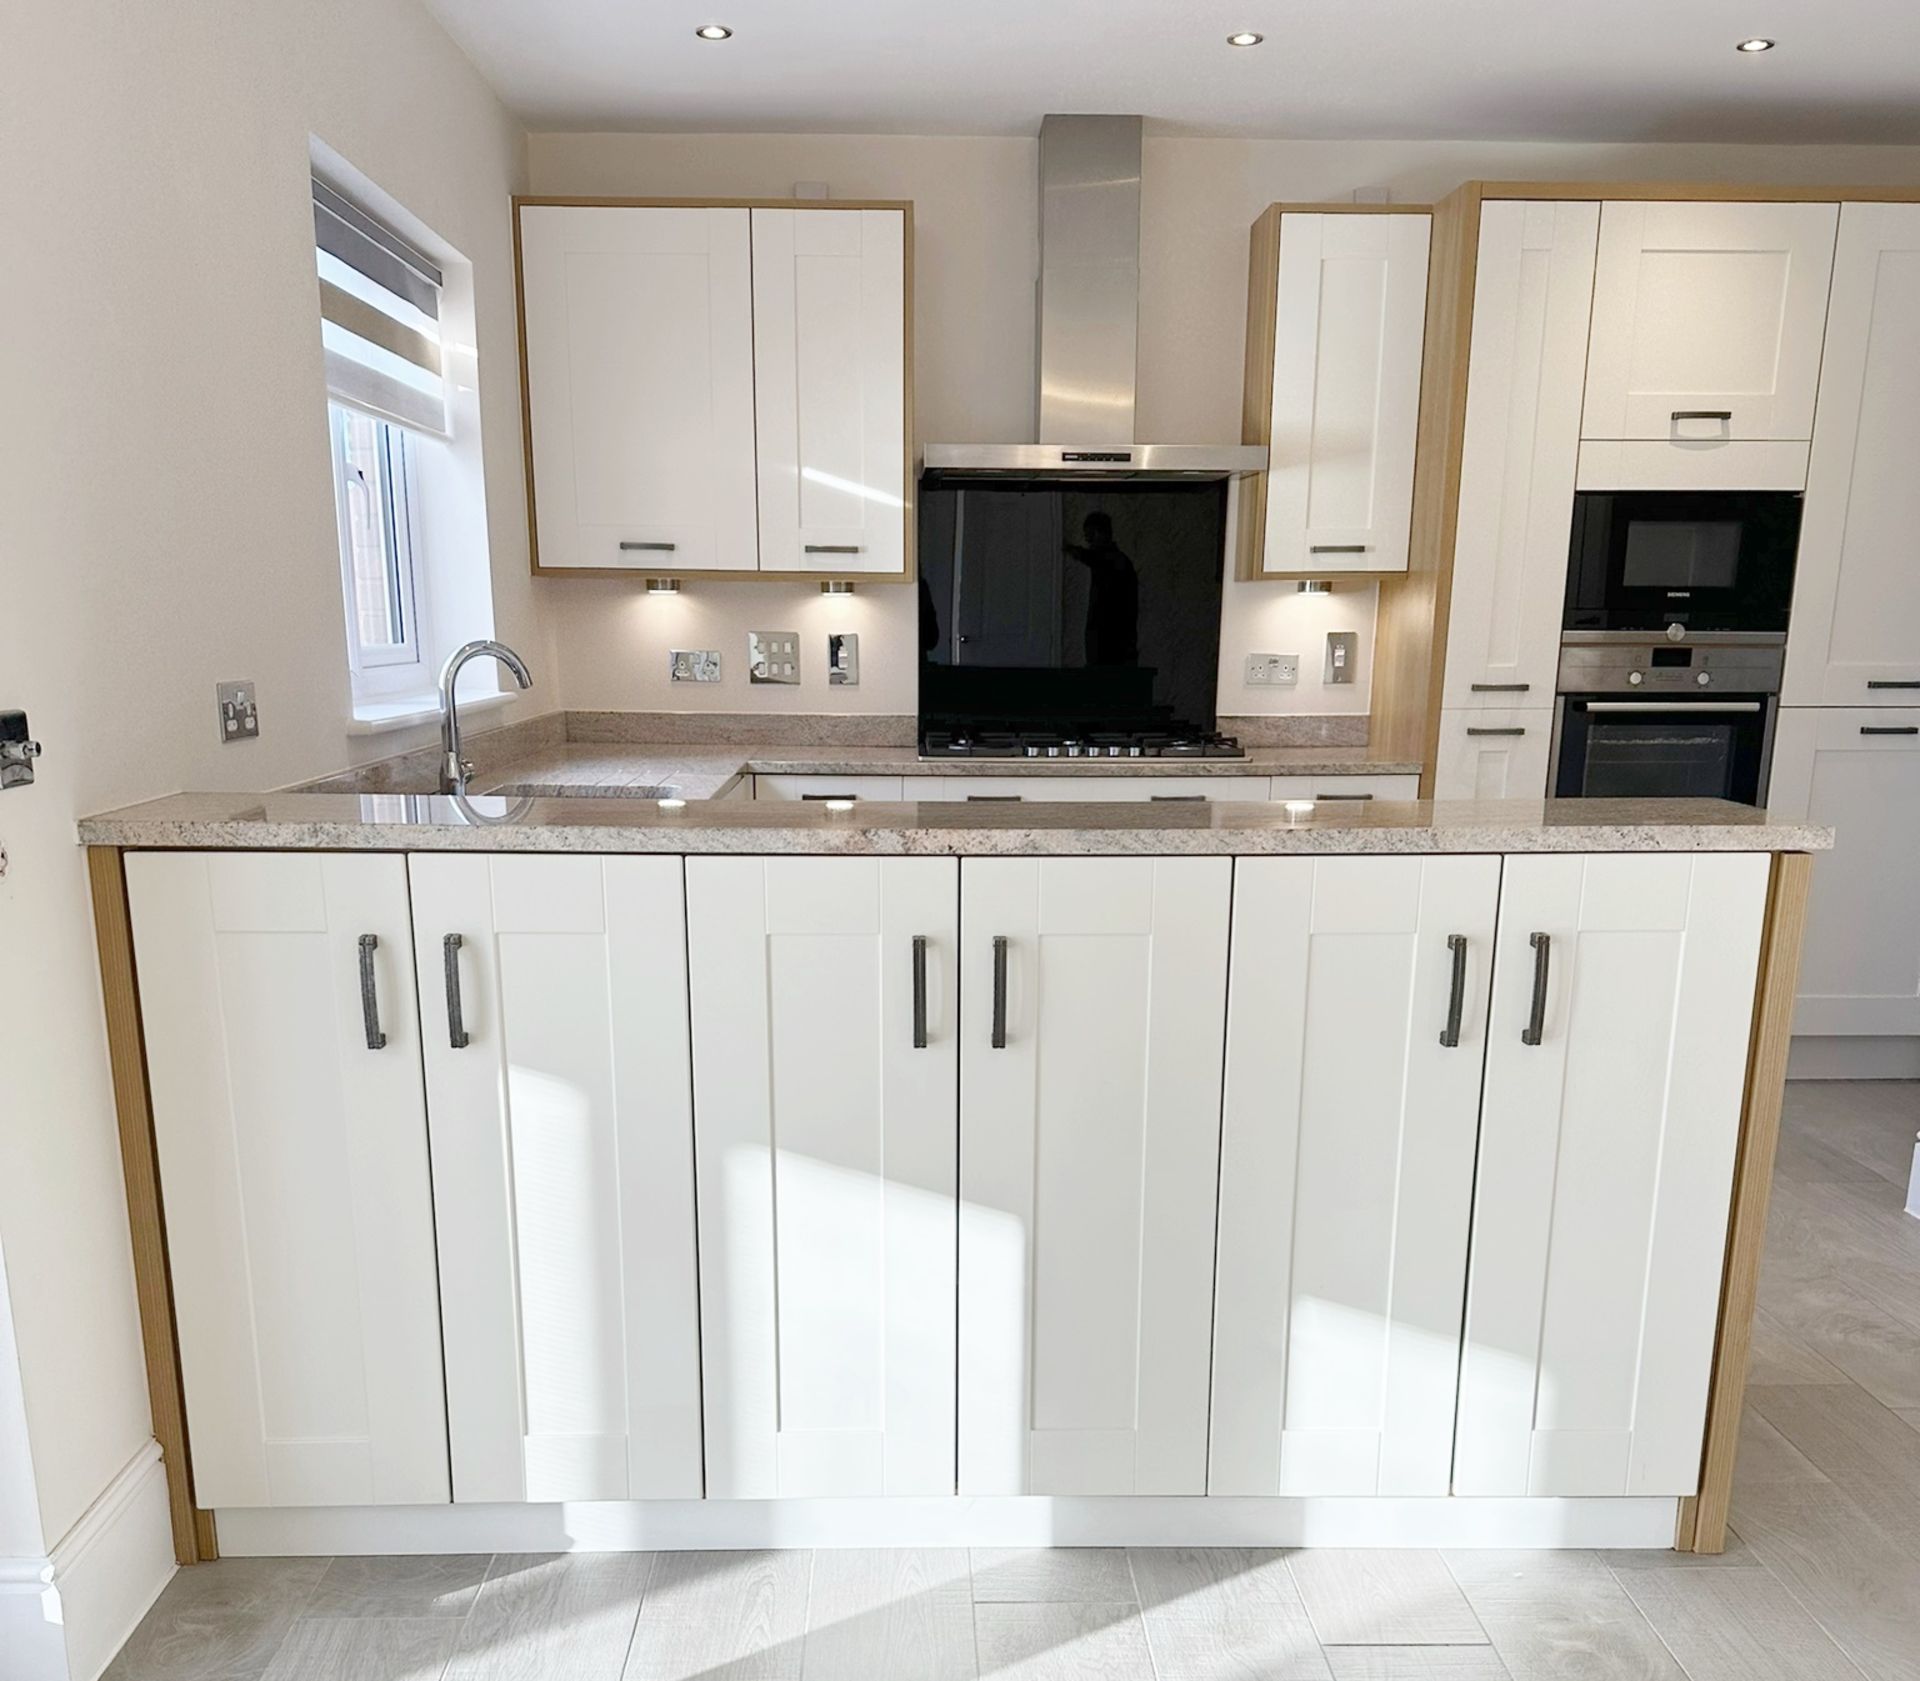 1 x SYMPHONY Contemporary Bespoke Fitted Shaker-Style Kitchen, With Branded Appliances, Granite Tops - Image 3 of 36